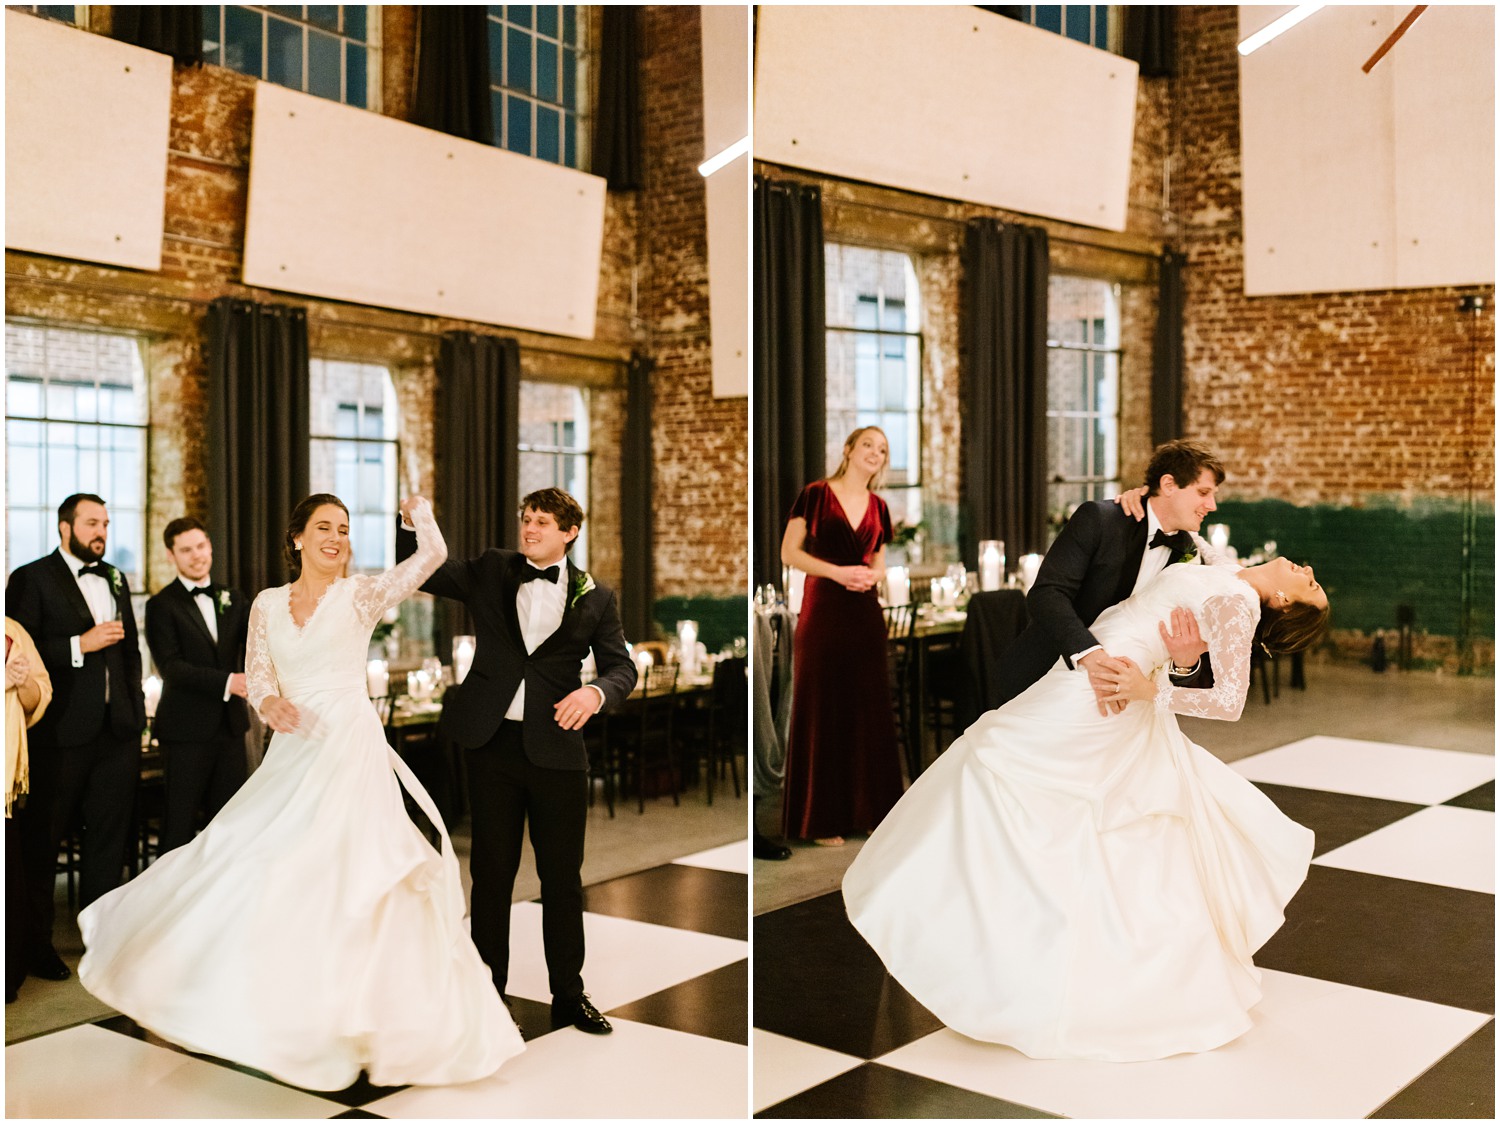 Greensboro NC wedding reception photographed by Chelsea Renay Photography